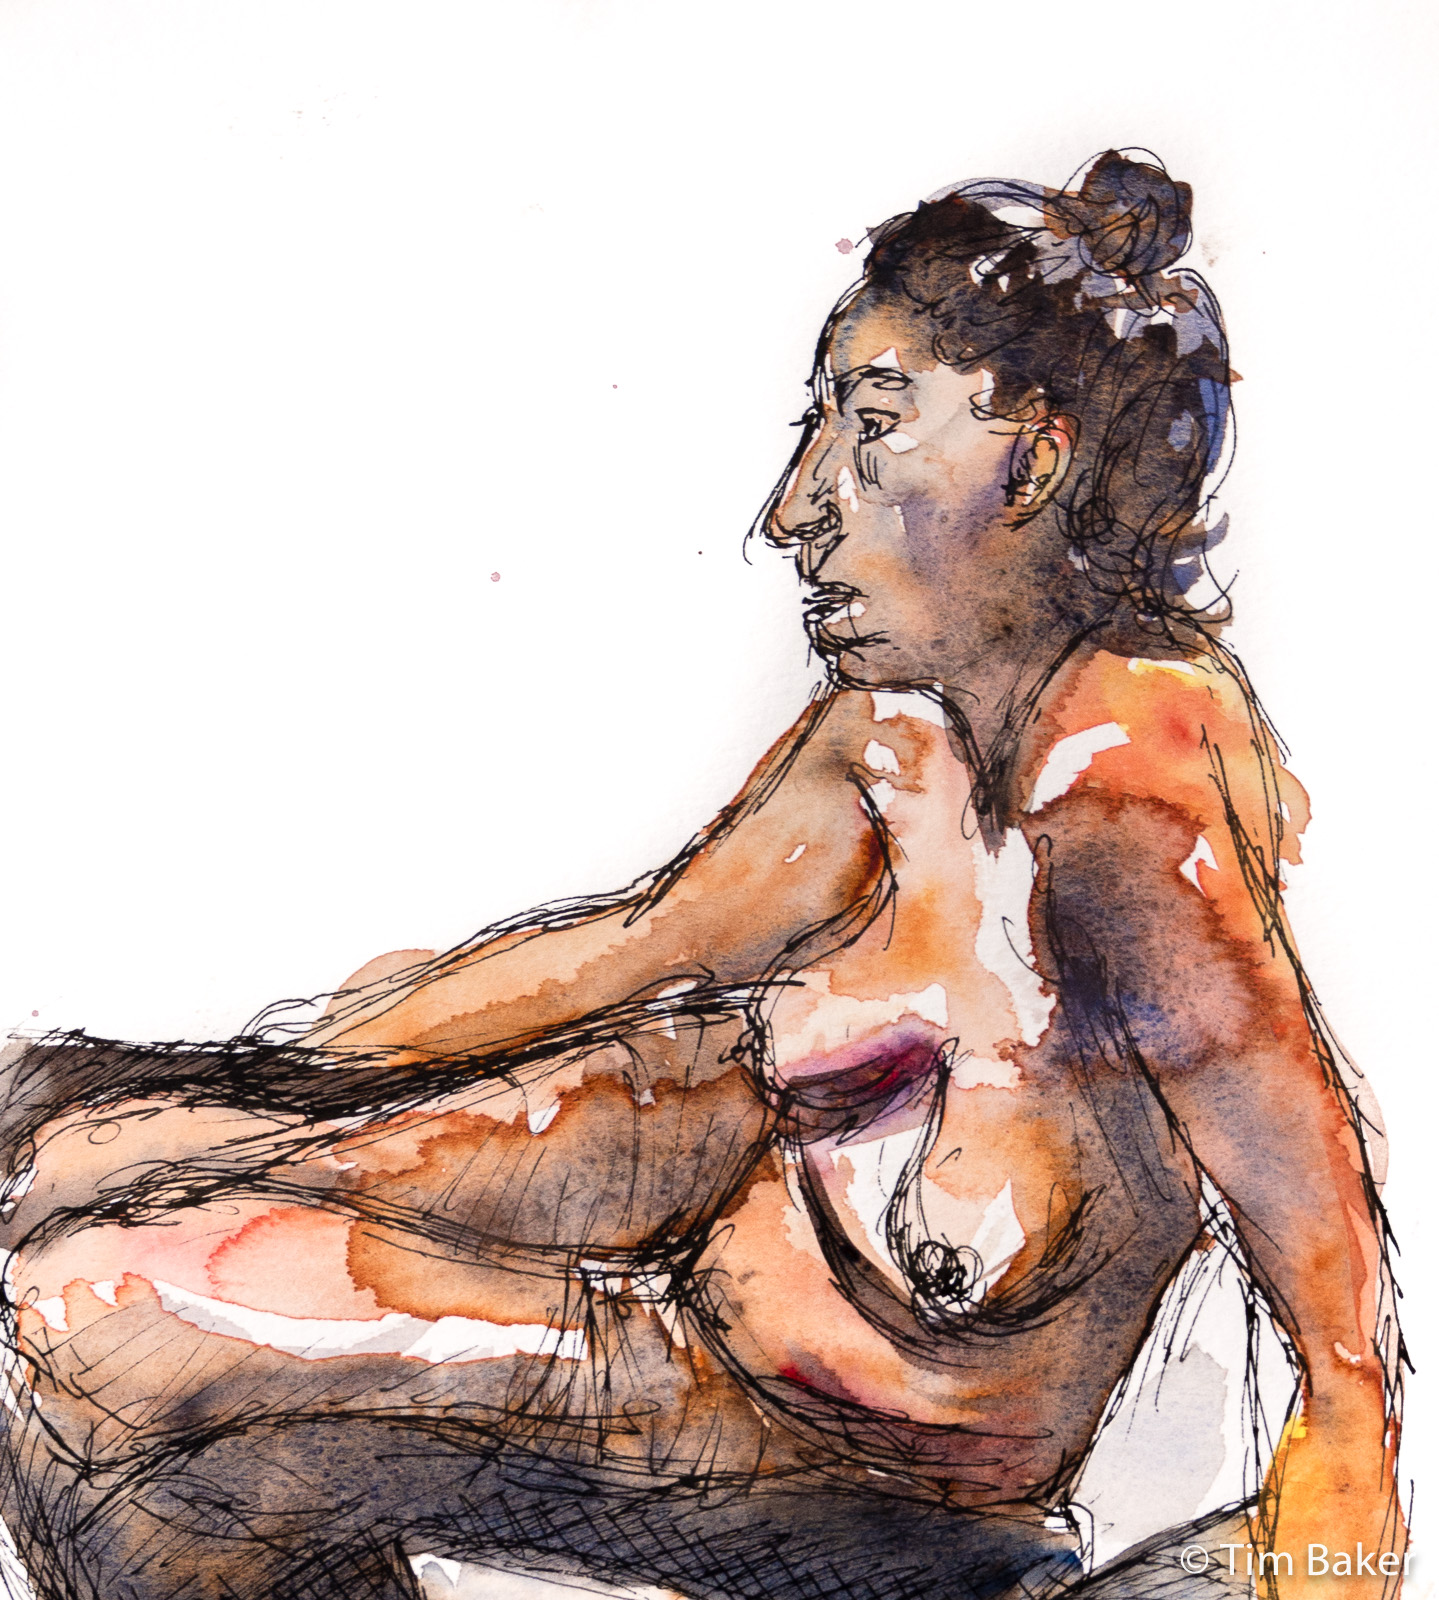 Naz (detail), Life Drawing #64, Pump fineliner and watercolour, 25x35.5cm, Fabriano Unica? paper.